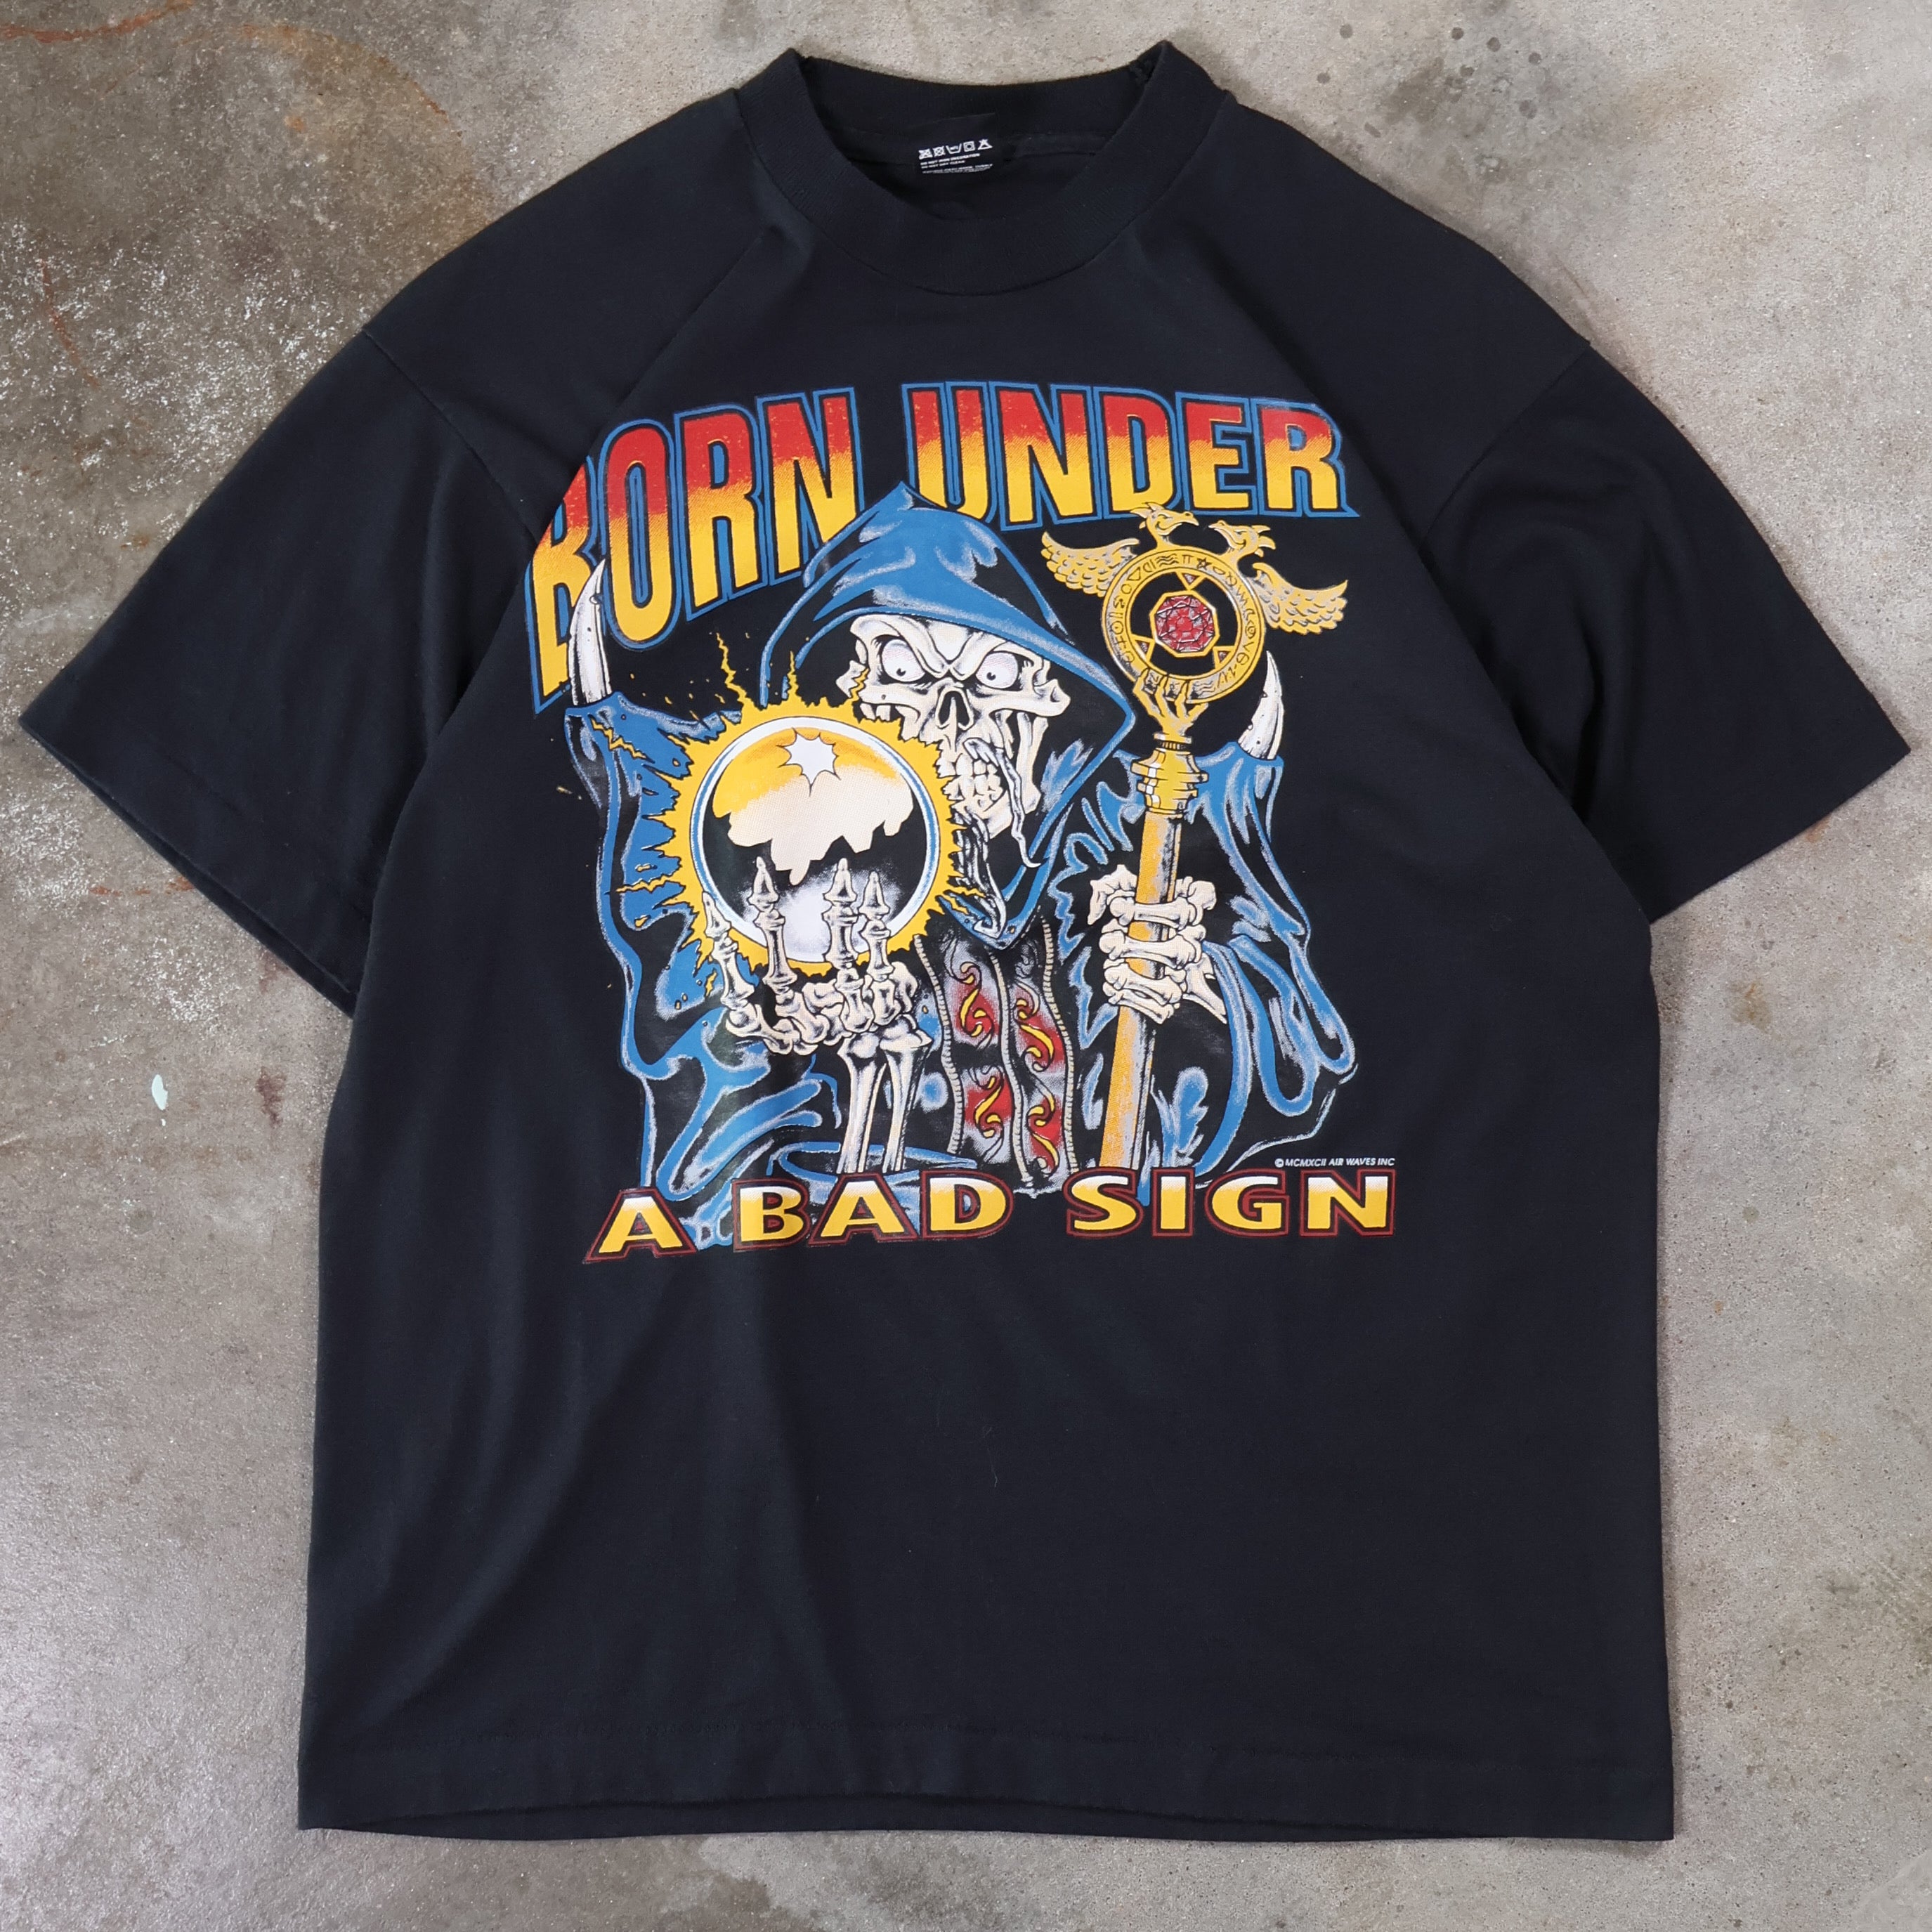 Born Under A Bad Sign 90s T-Shirt (Large)